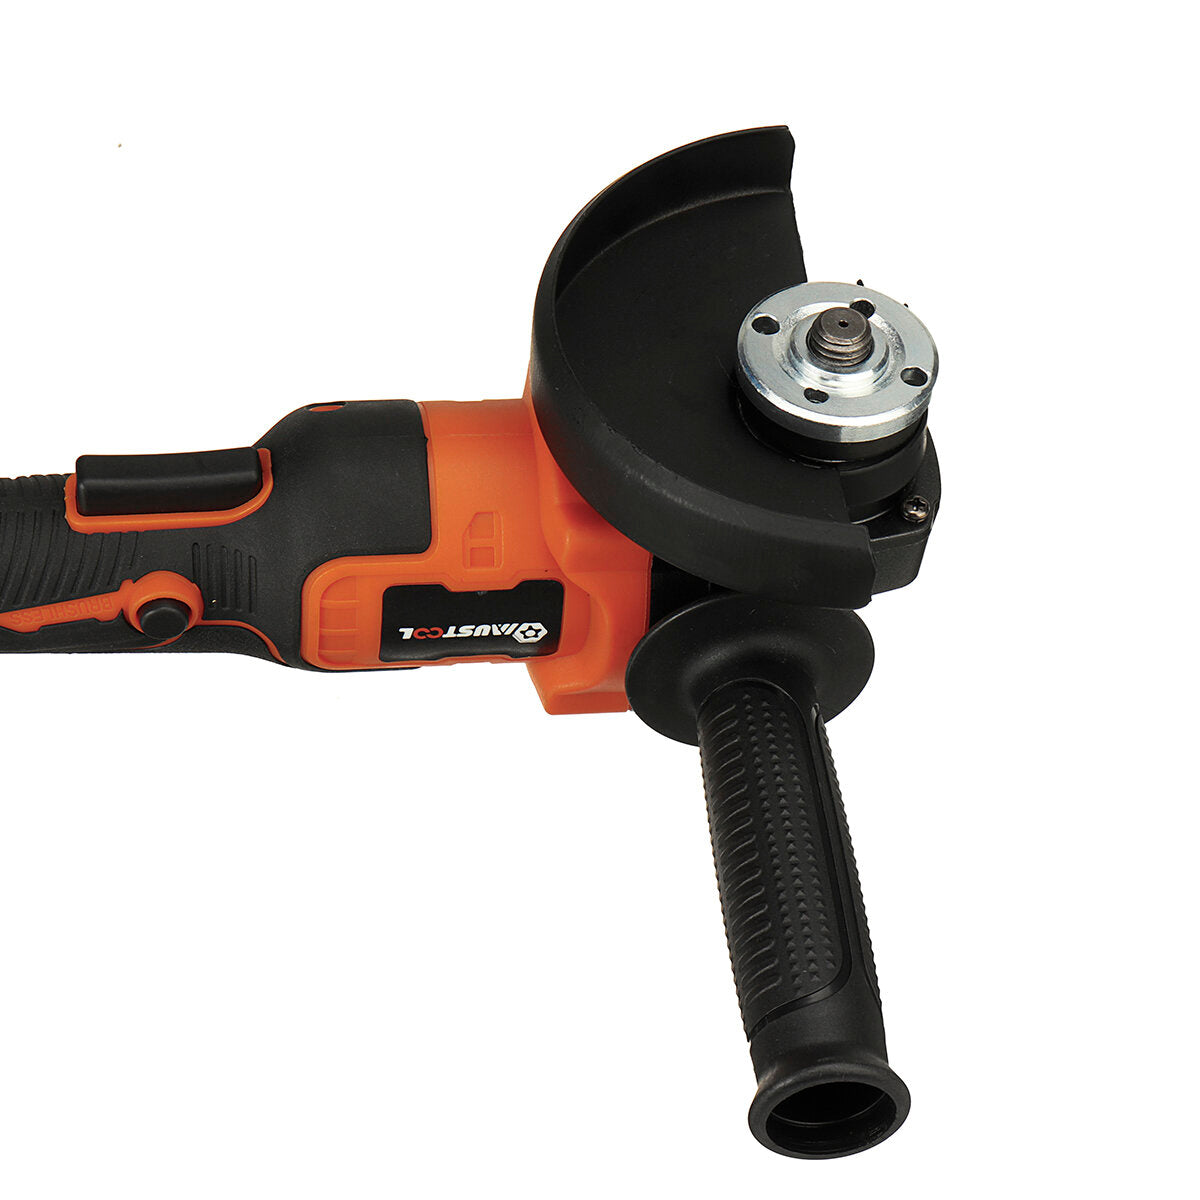 1600W 388VF 125mm Rubber + ABS + Steel Rechargeable Lithium Battery Technology Brushless Angle Grinder